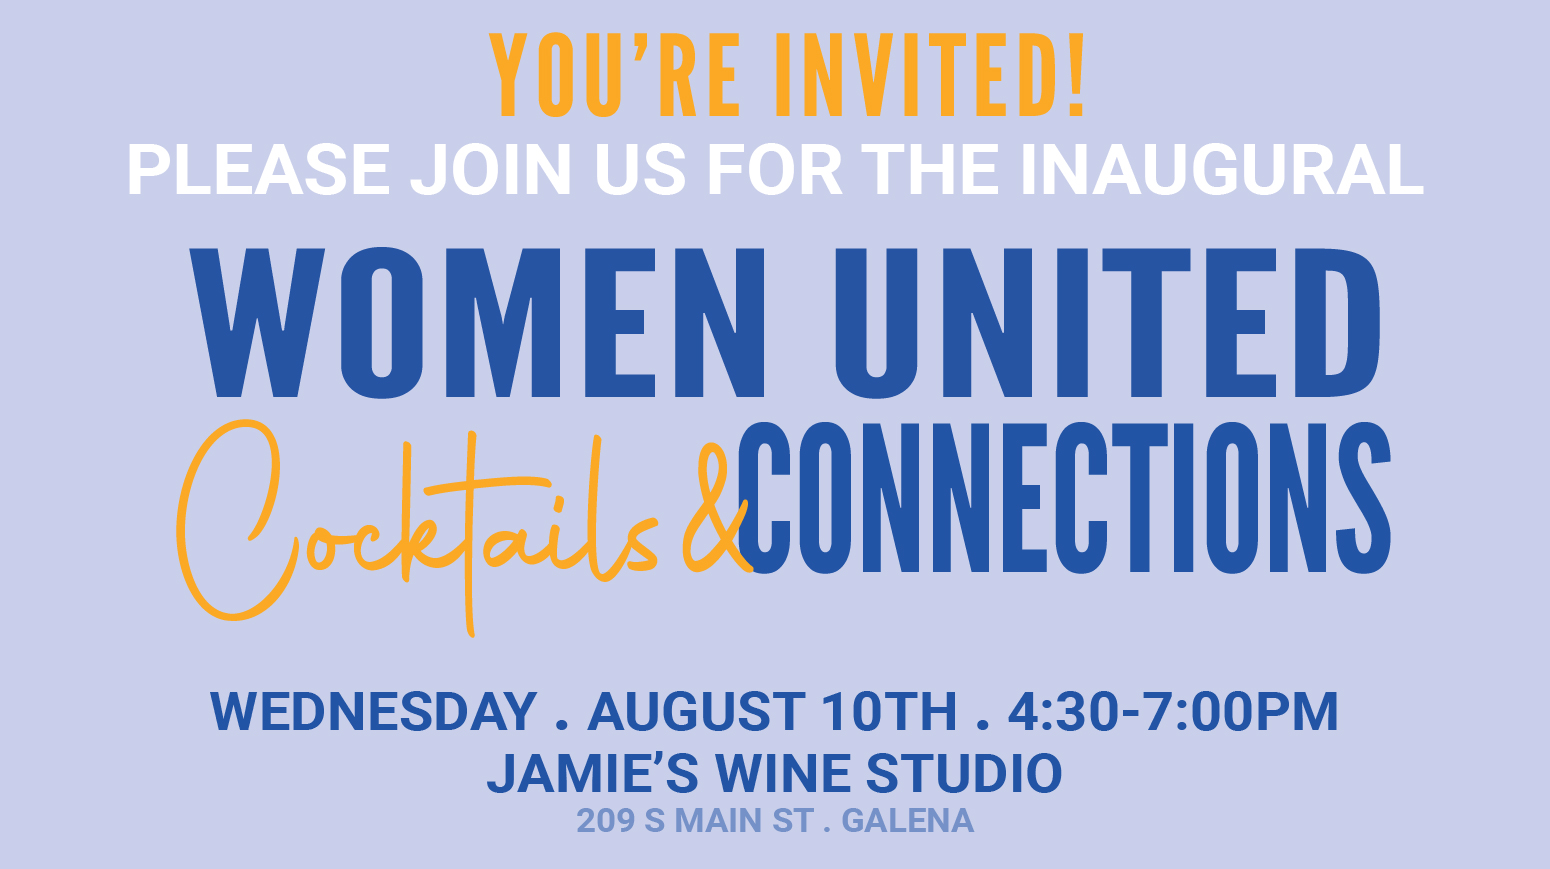 Women United Cocktails & Connections August 10th at Jamie's Wine Studio in Galena